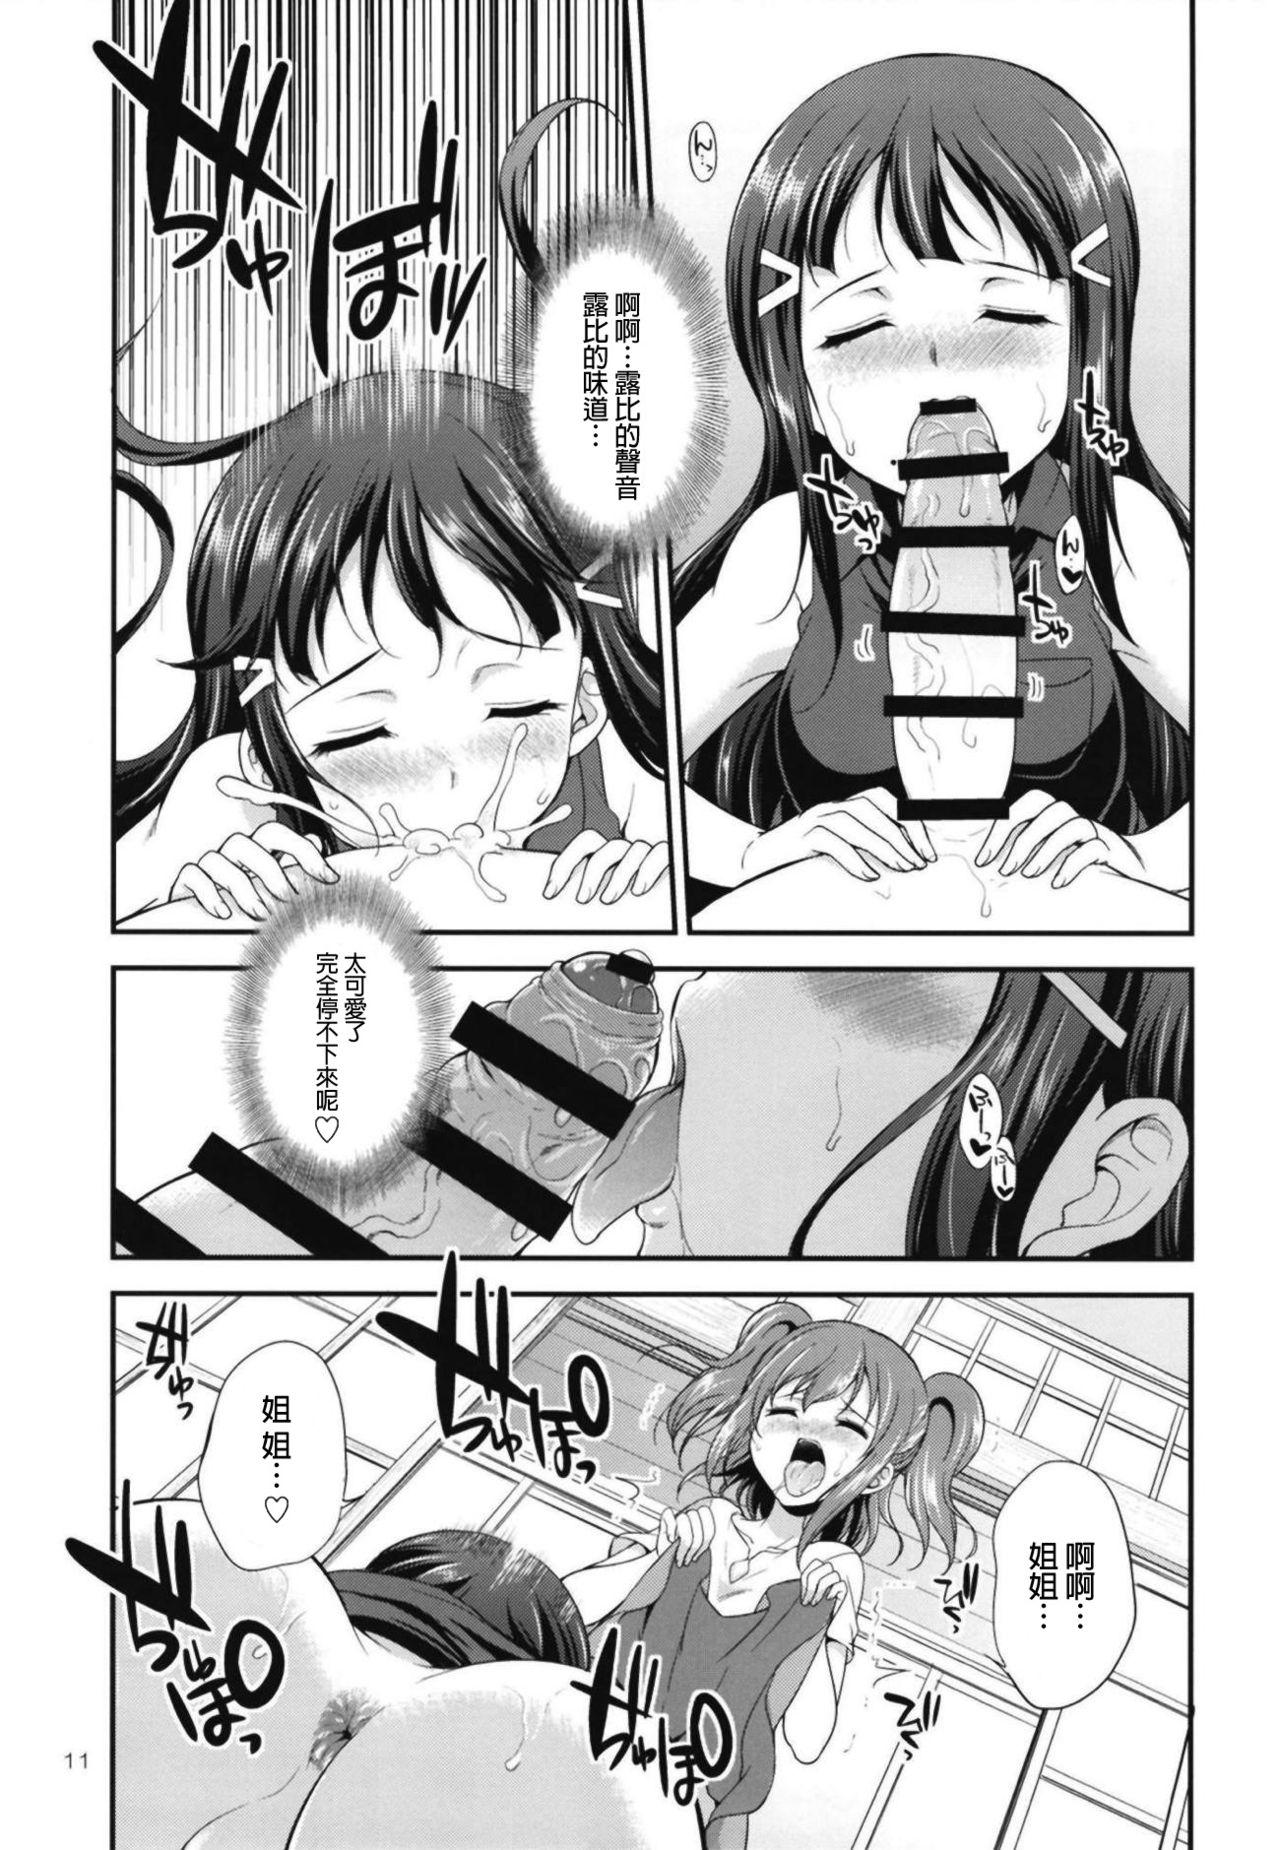 Gay Hairy FUTAqours side-dia&ruby - Love live sunshine Amature Allure - Page 11